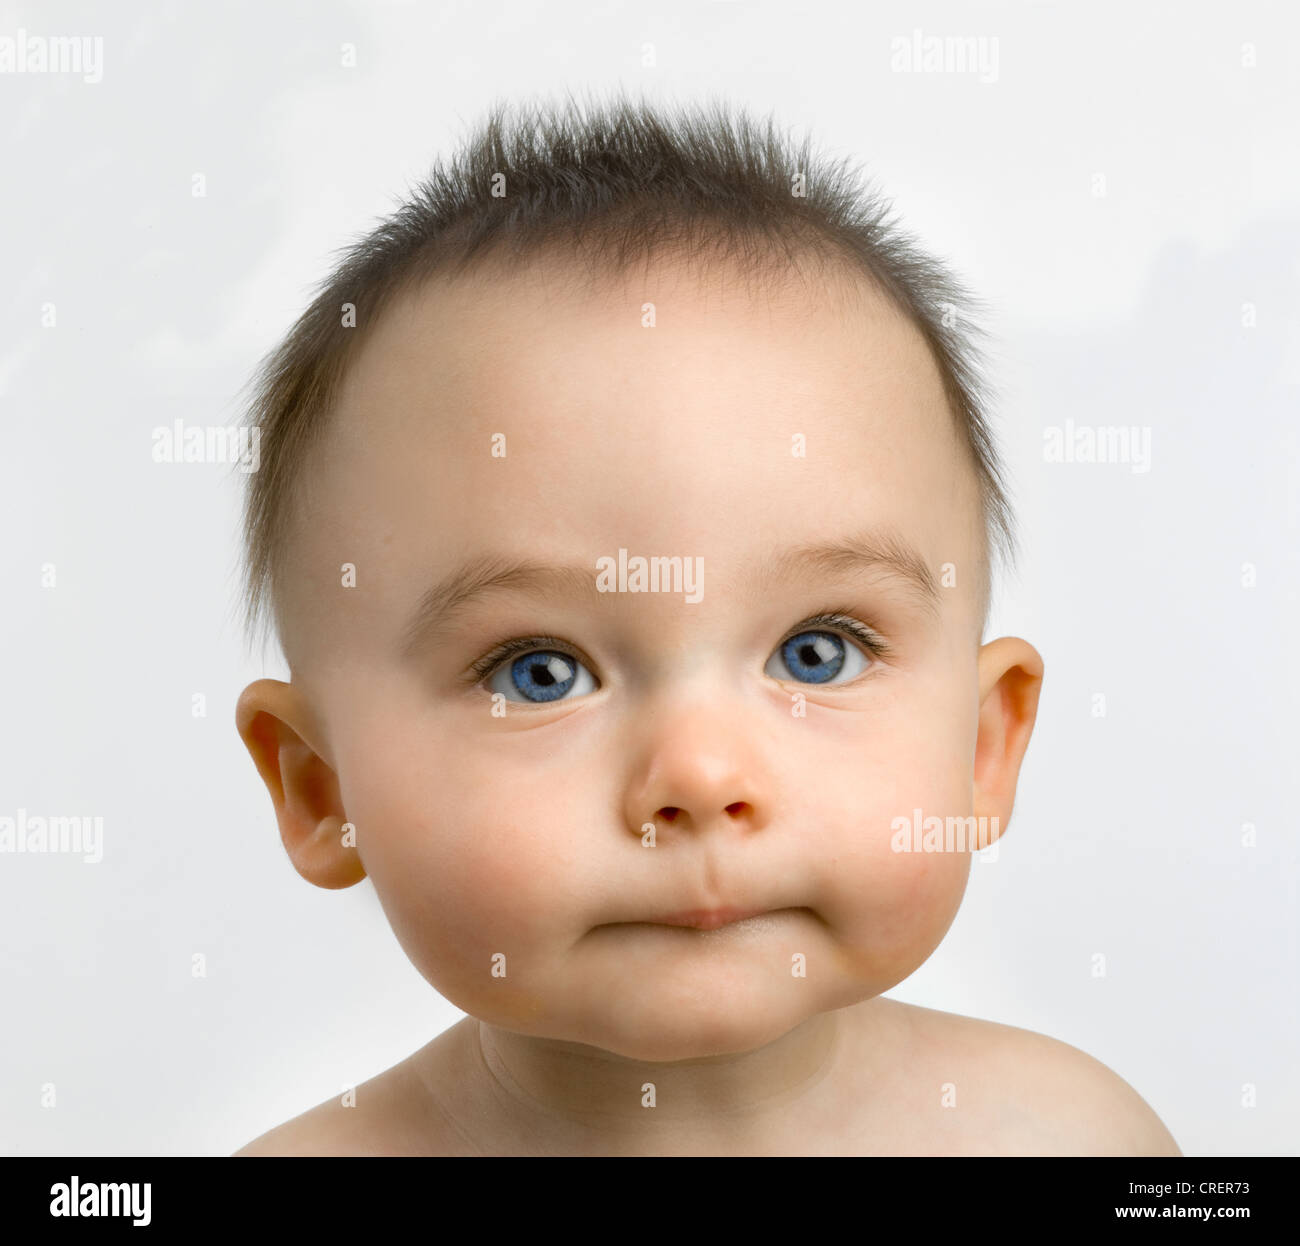 Head and shoulders of a captivating 8 month old baby with spiky hair looking  straight ahead with a great expression Stock Photo